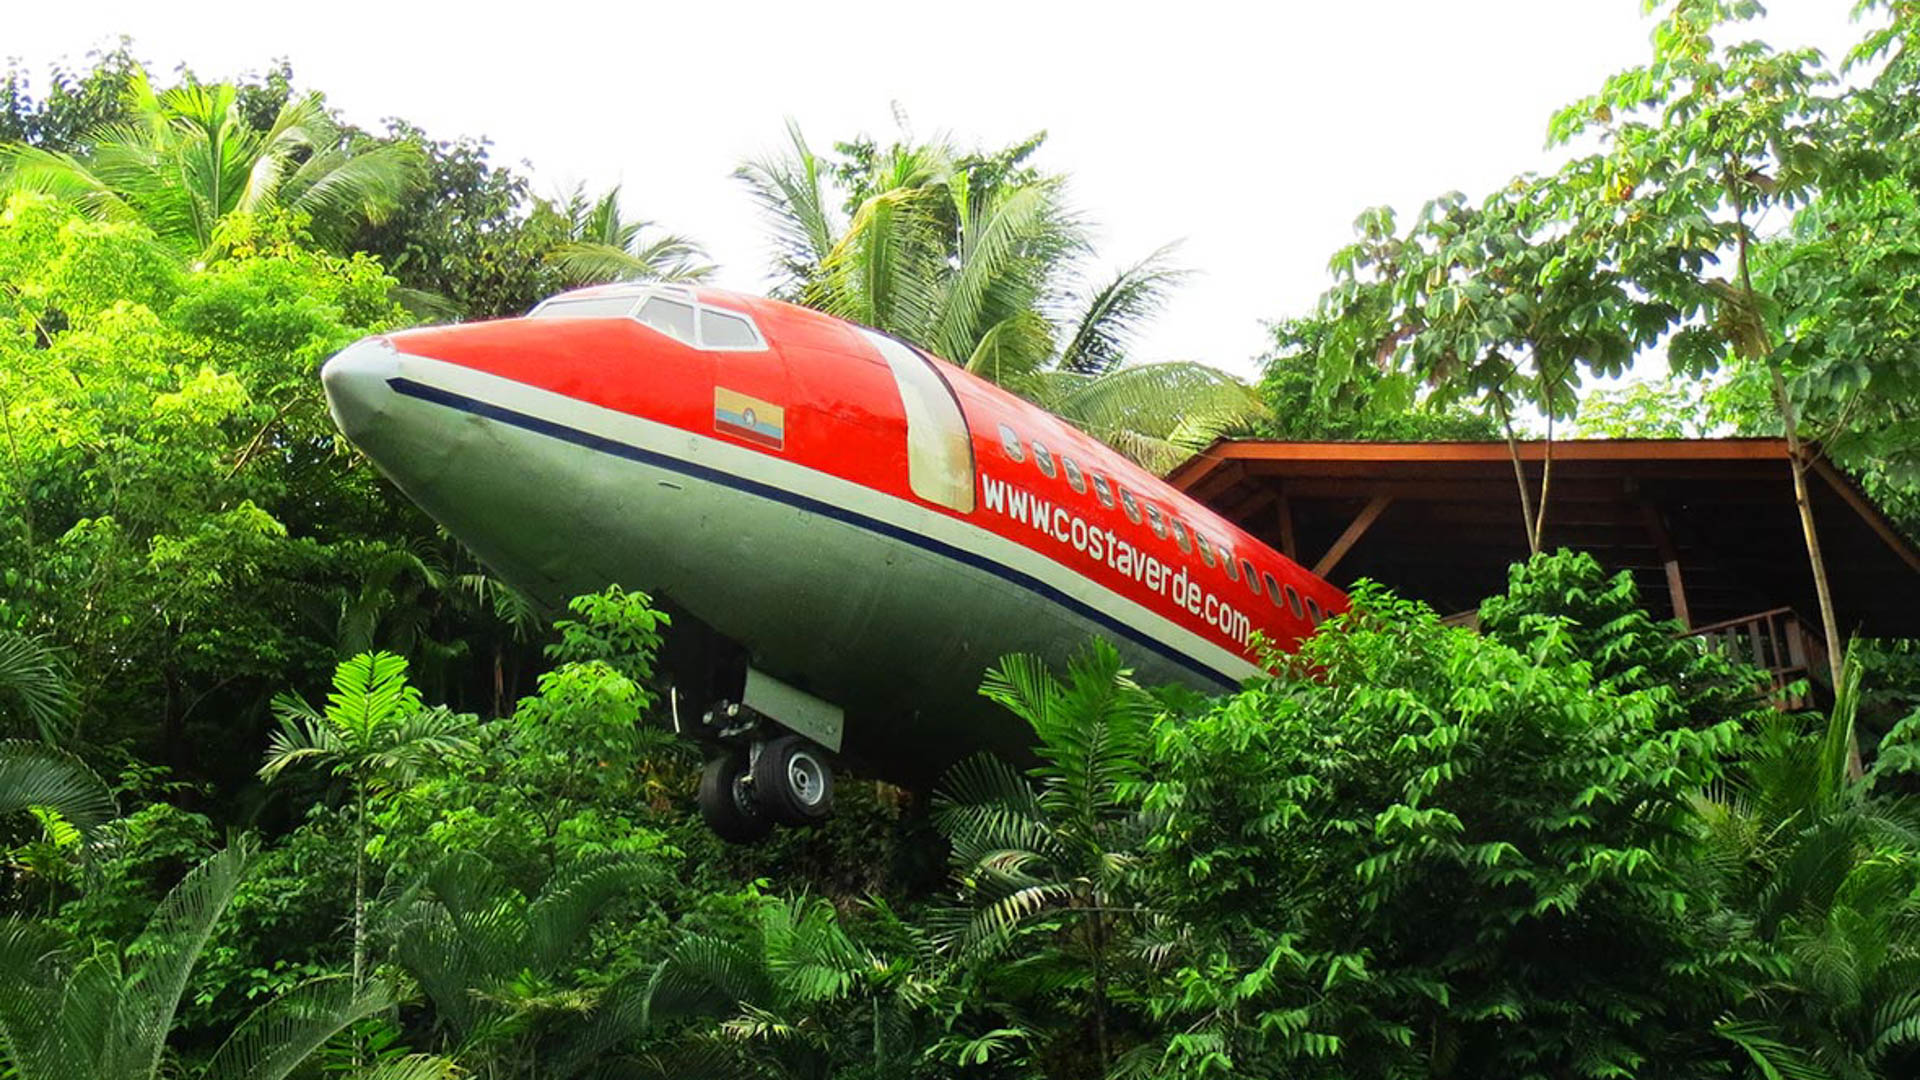 This Boeing 727 Hanging in the Costa Rica Jungle Is a Wild Luxury Treehouse